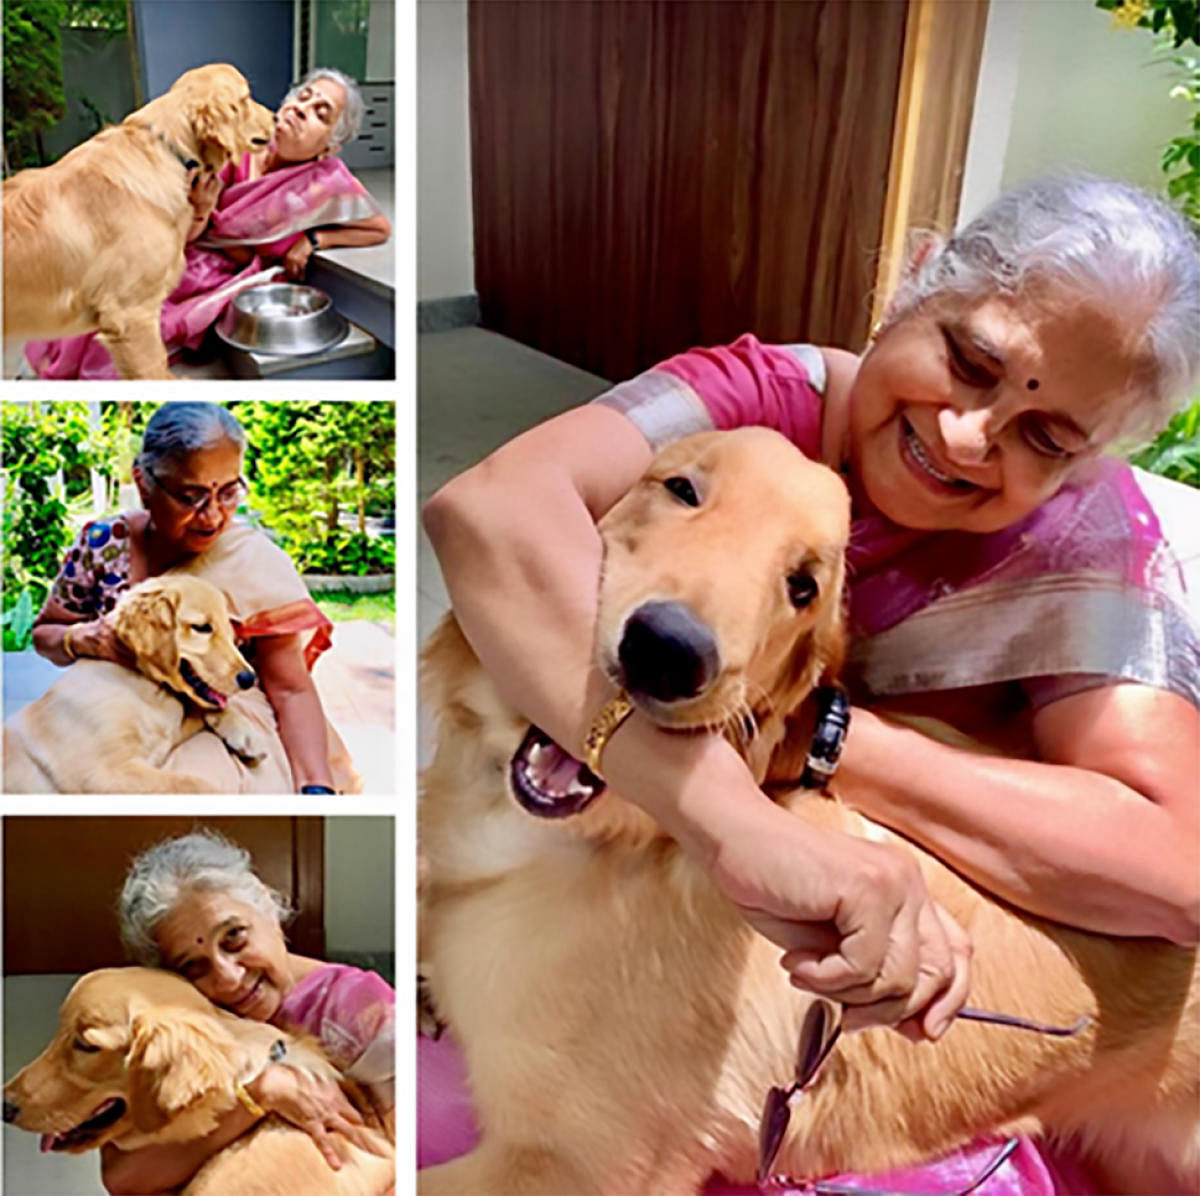 Coming soon: Trilogy by Sudha Murty on her pet dog Gopi